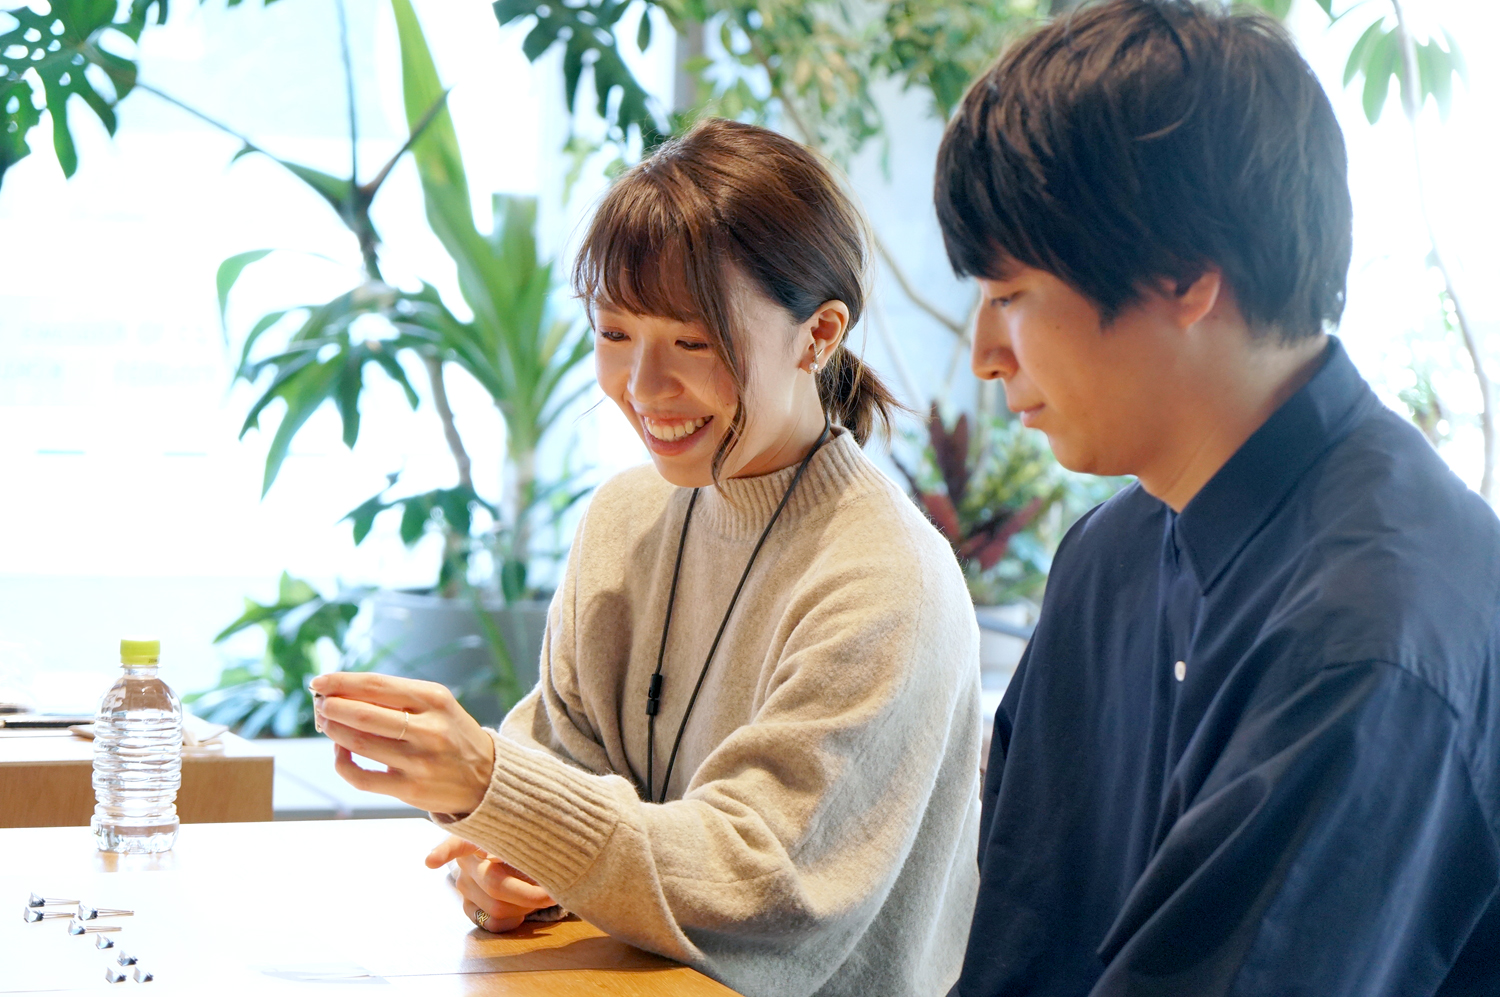 KOKUYO's Aya Homma (left), who was in charge of making the Smart Double Clip into a product. At the time, she was in charge of metal products such as staplers and cutters.